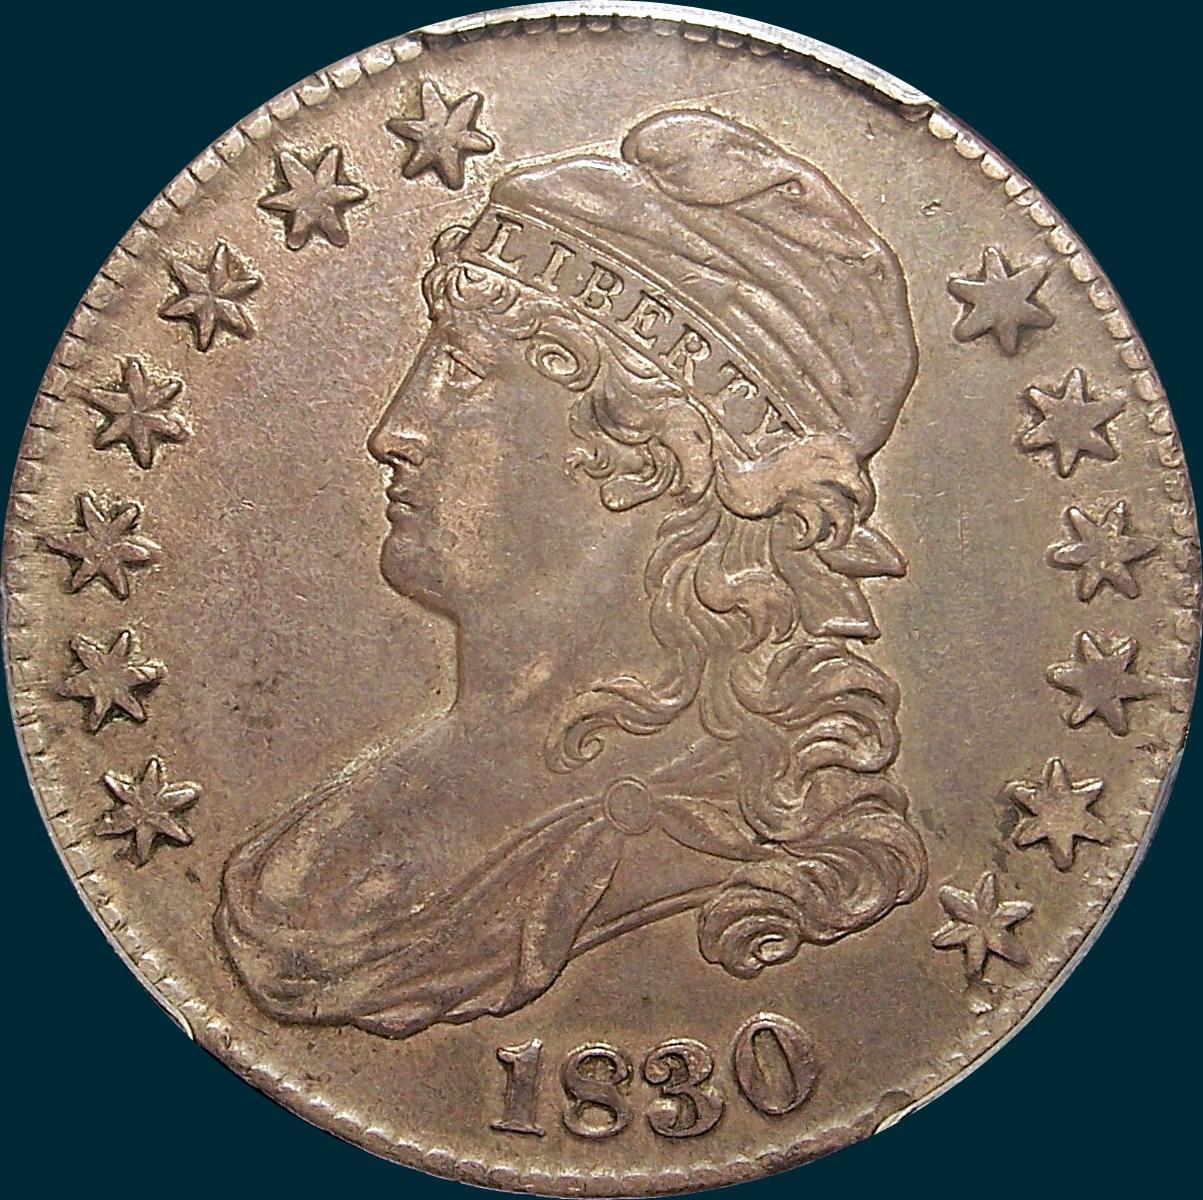 1830, O-122, Large 0, Capped Bust, Half Dollar